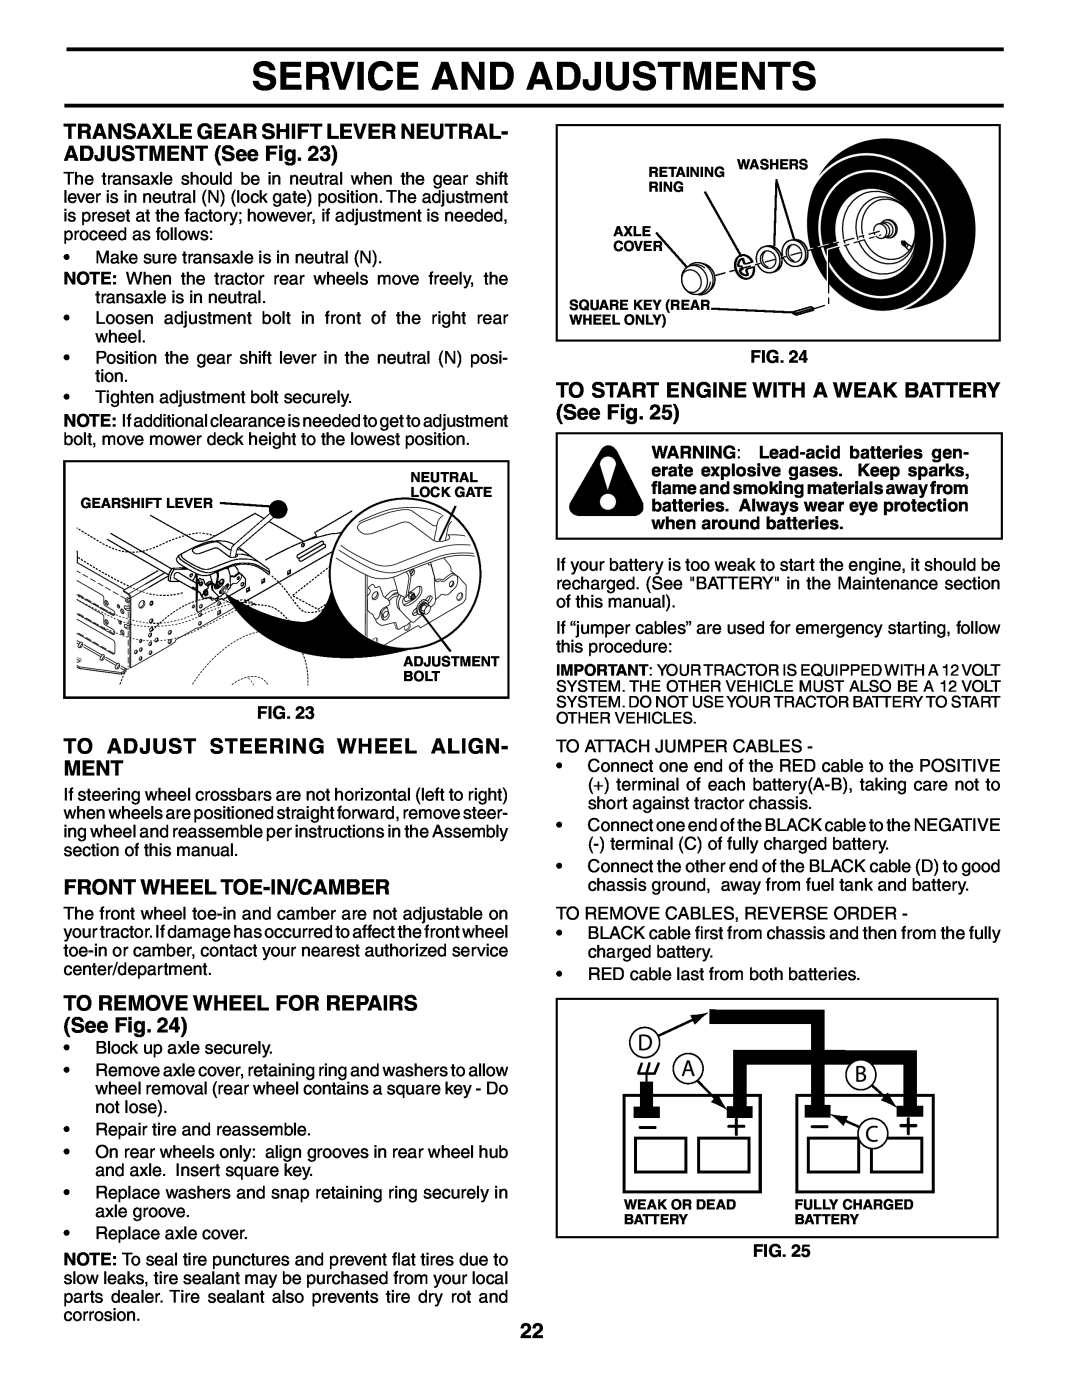 Poulan PK1942LT manual To Adjust Steering Wheel Align- Ment, Front Wheel Toe-In/Camber, TO REMOVE WHEEL FOR REPAIRS See Fig 